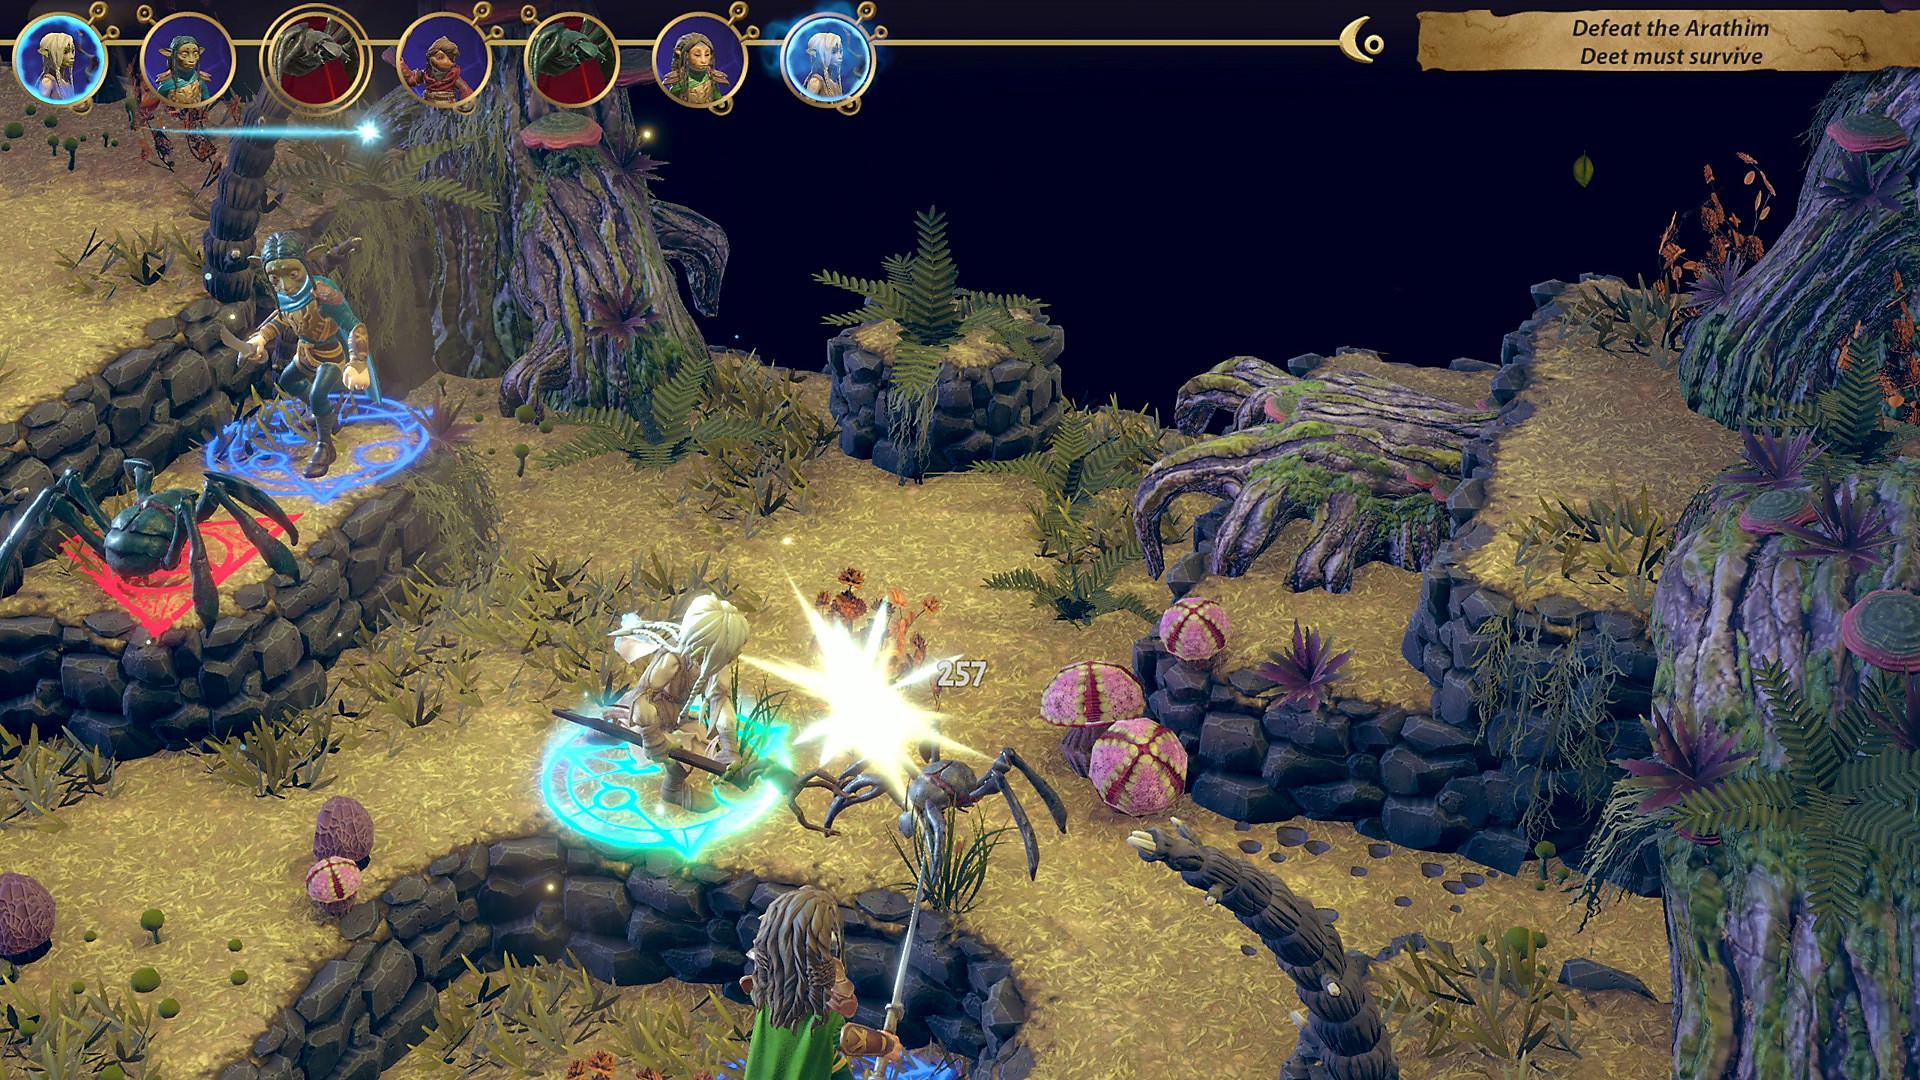 The Dark Crystal: Age of Resistance Tactics Game. PS4